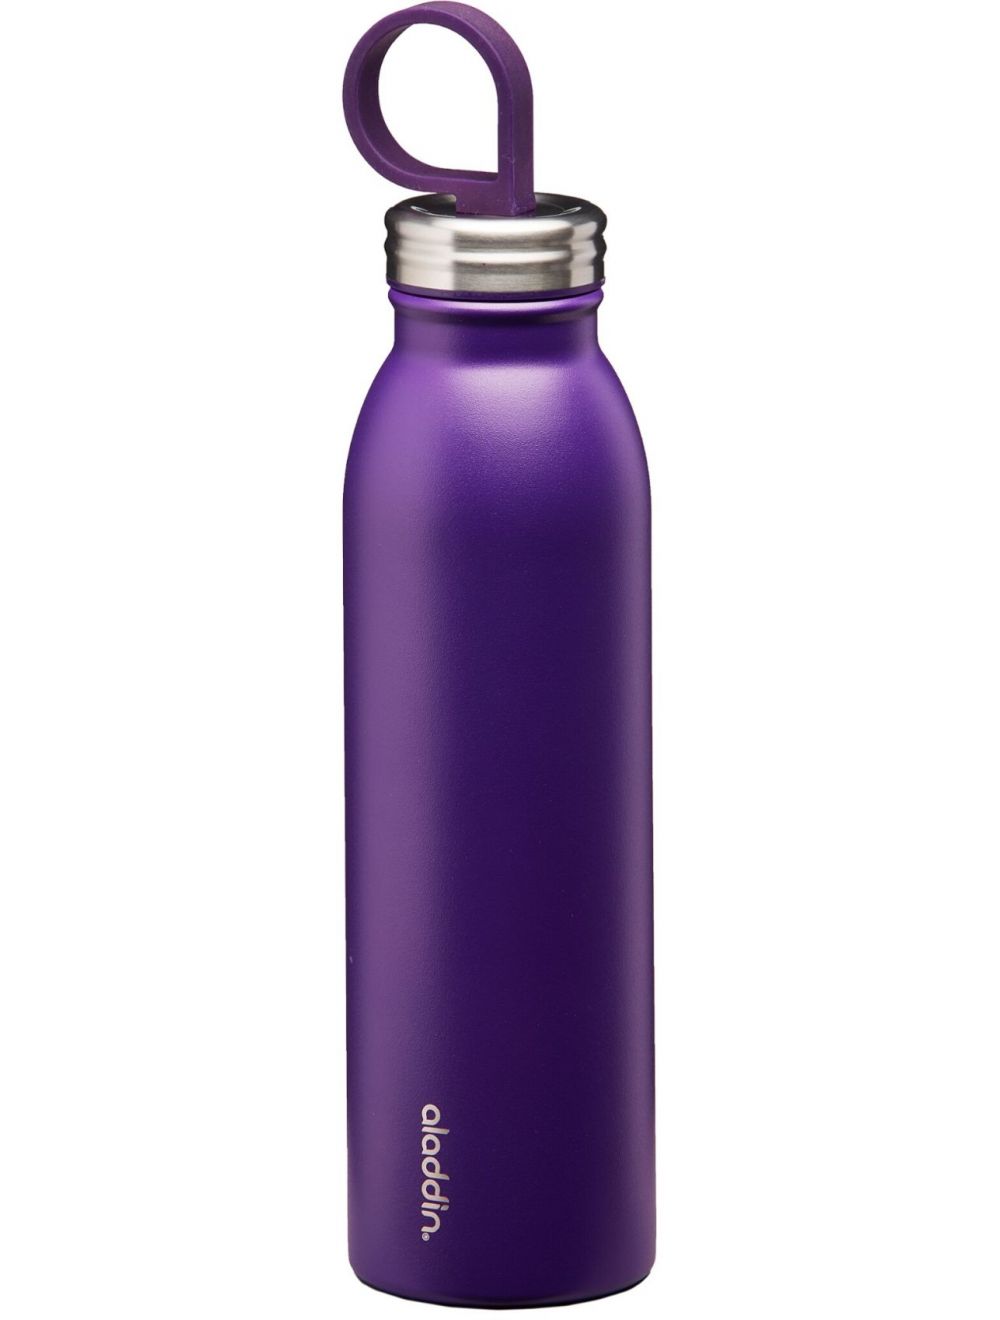 Aladdin Chilled Thermavac Stainless Steel Water Bottle 0.55L Violet Purple